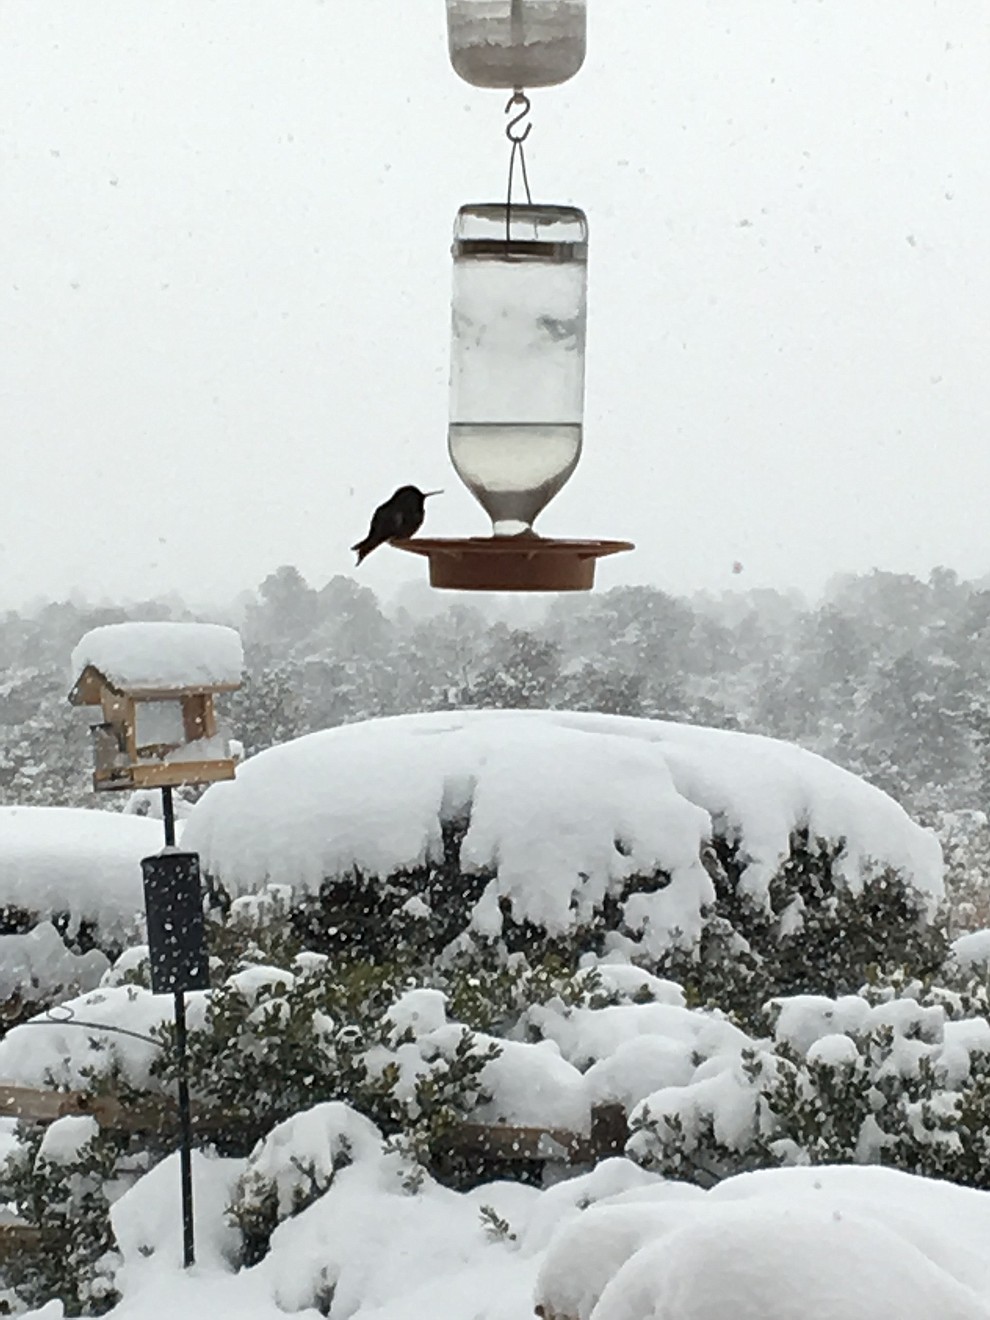 Hummingbirds are still at our feeder in spite of the snow.